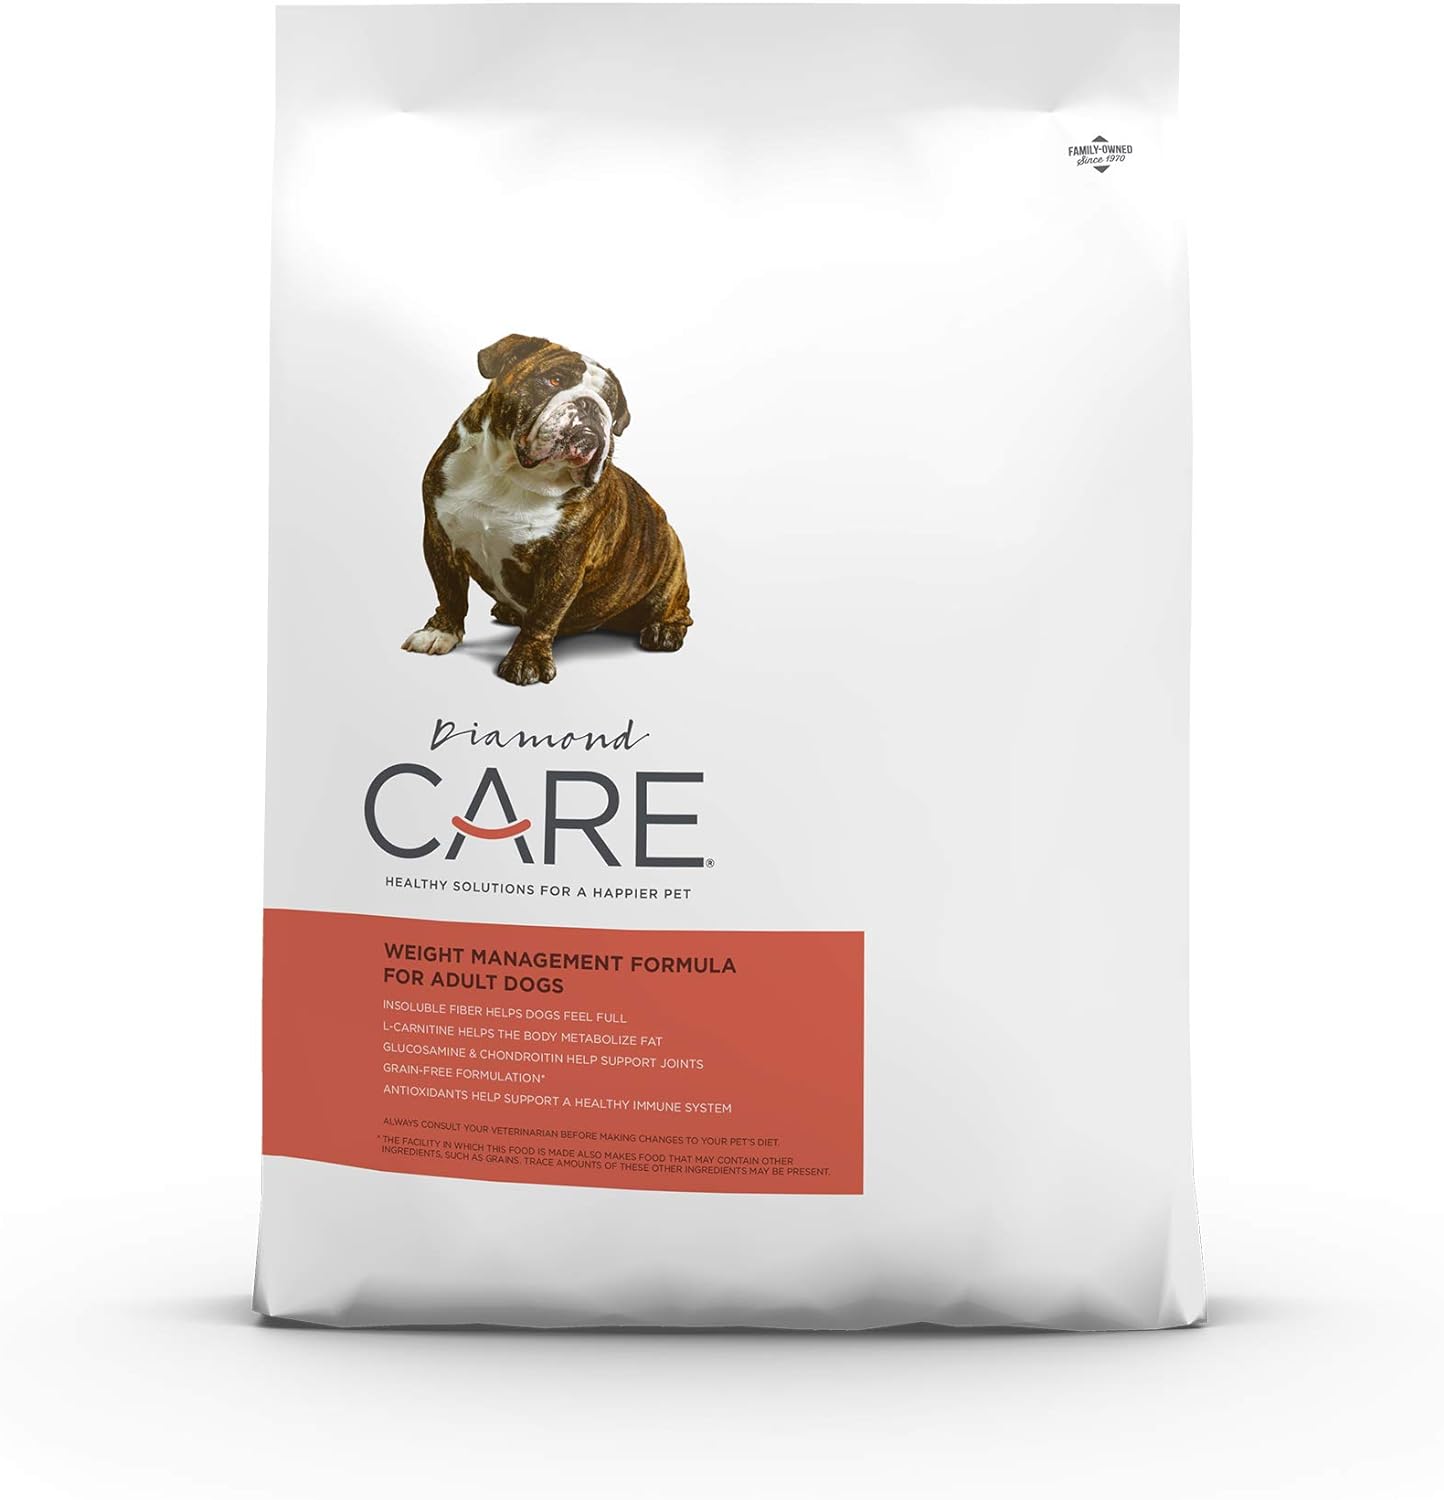 Diamond Care Weight Management Formula for Adult Dogs Dry Dog Food – Gallery Image 1